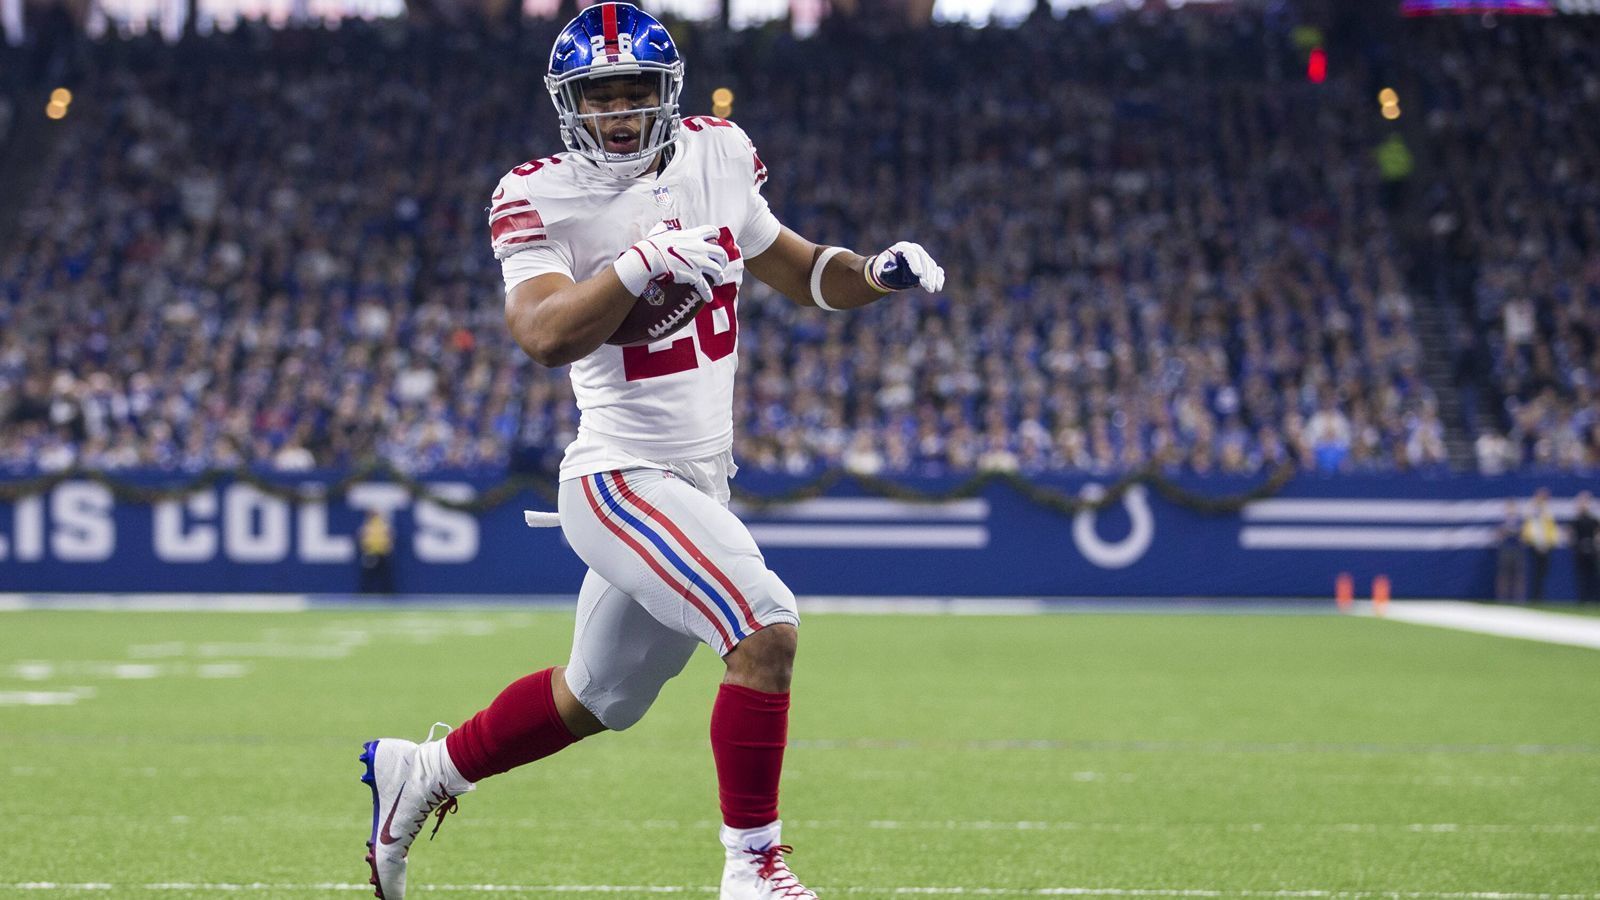 
                <strong>New York Giants: Saquon Barkley (Running Back)</strong><br>
                Madden-Rating: 91
              